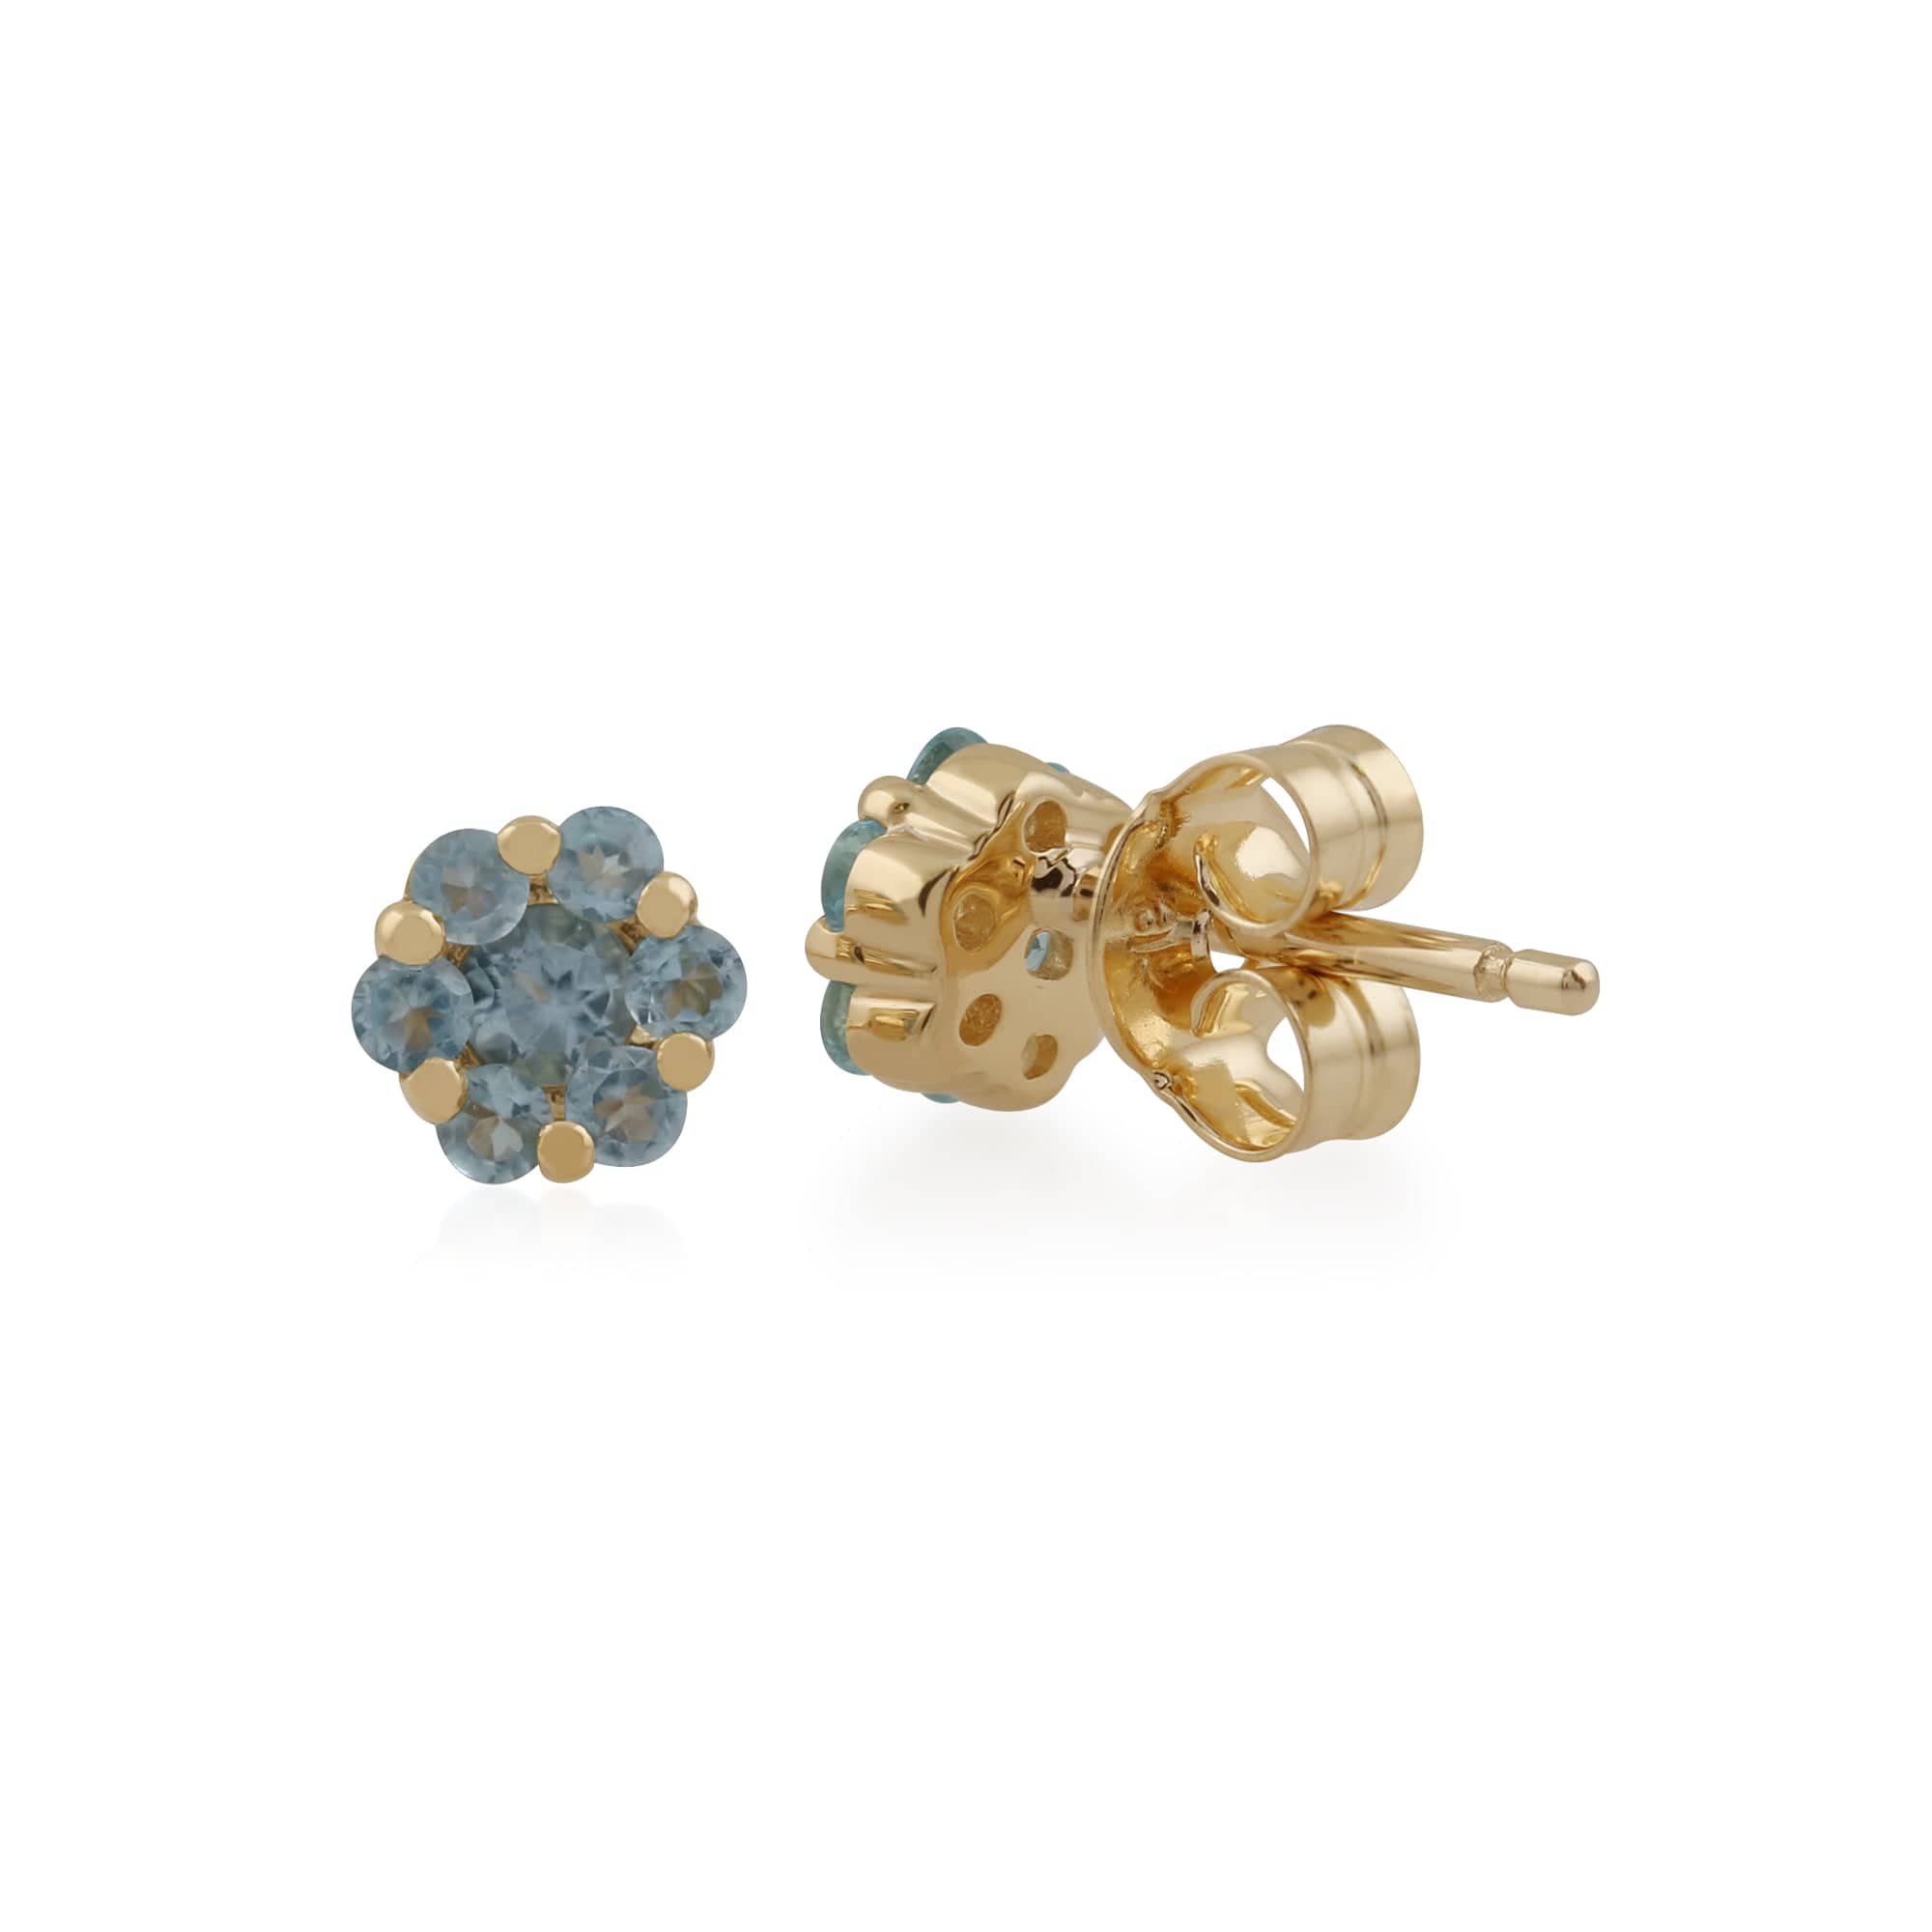 Floral Round Blue Topaz Cluster Stud Earrings in 9ct Yellow Gold - Gemondo